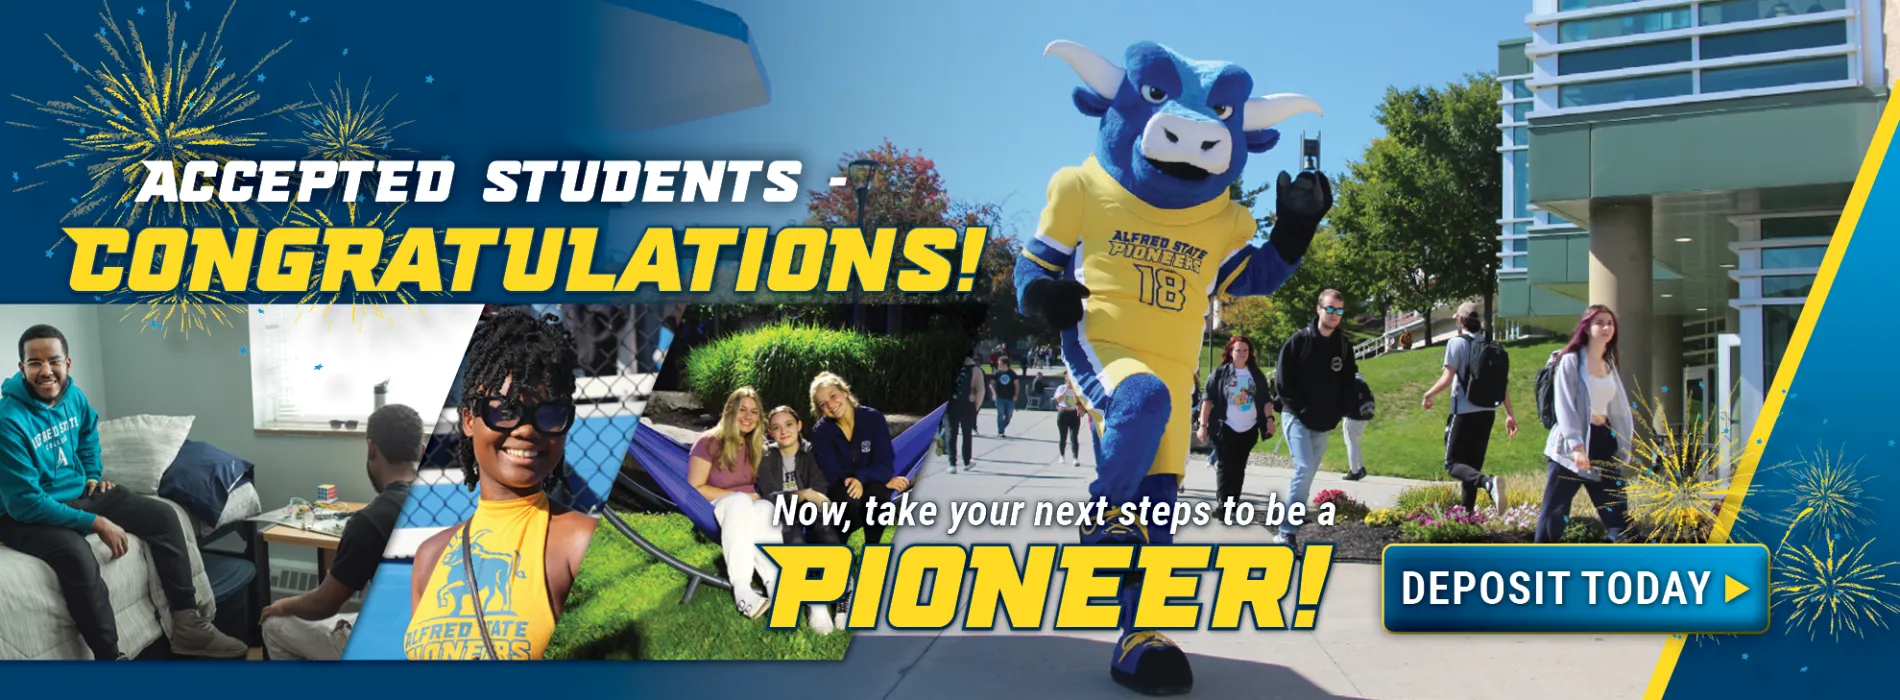 Accepted Students - Congratulations! Now, take your next steps to be a Pioneer. Deposit Today! Image of Big Blue the ox mascot taking steps on campus. inset of students smiling